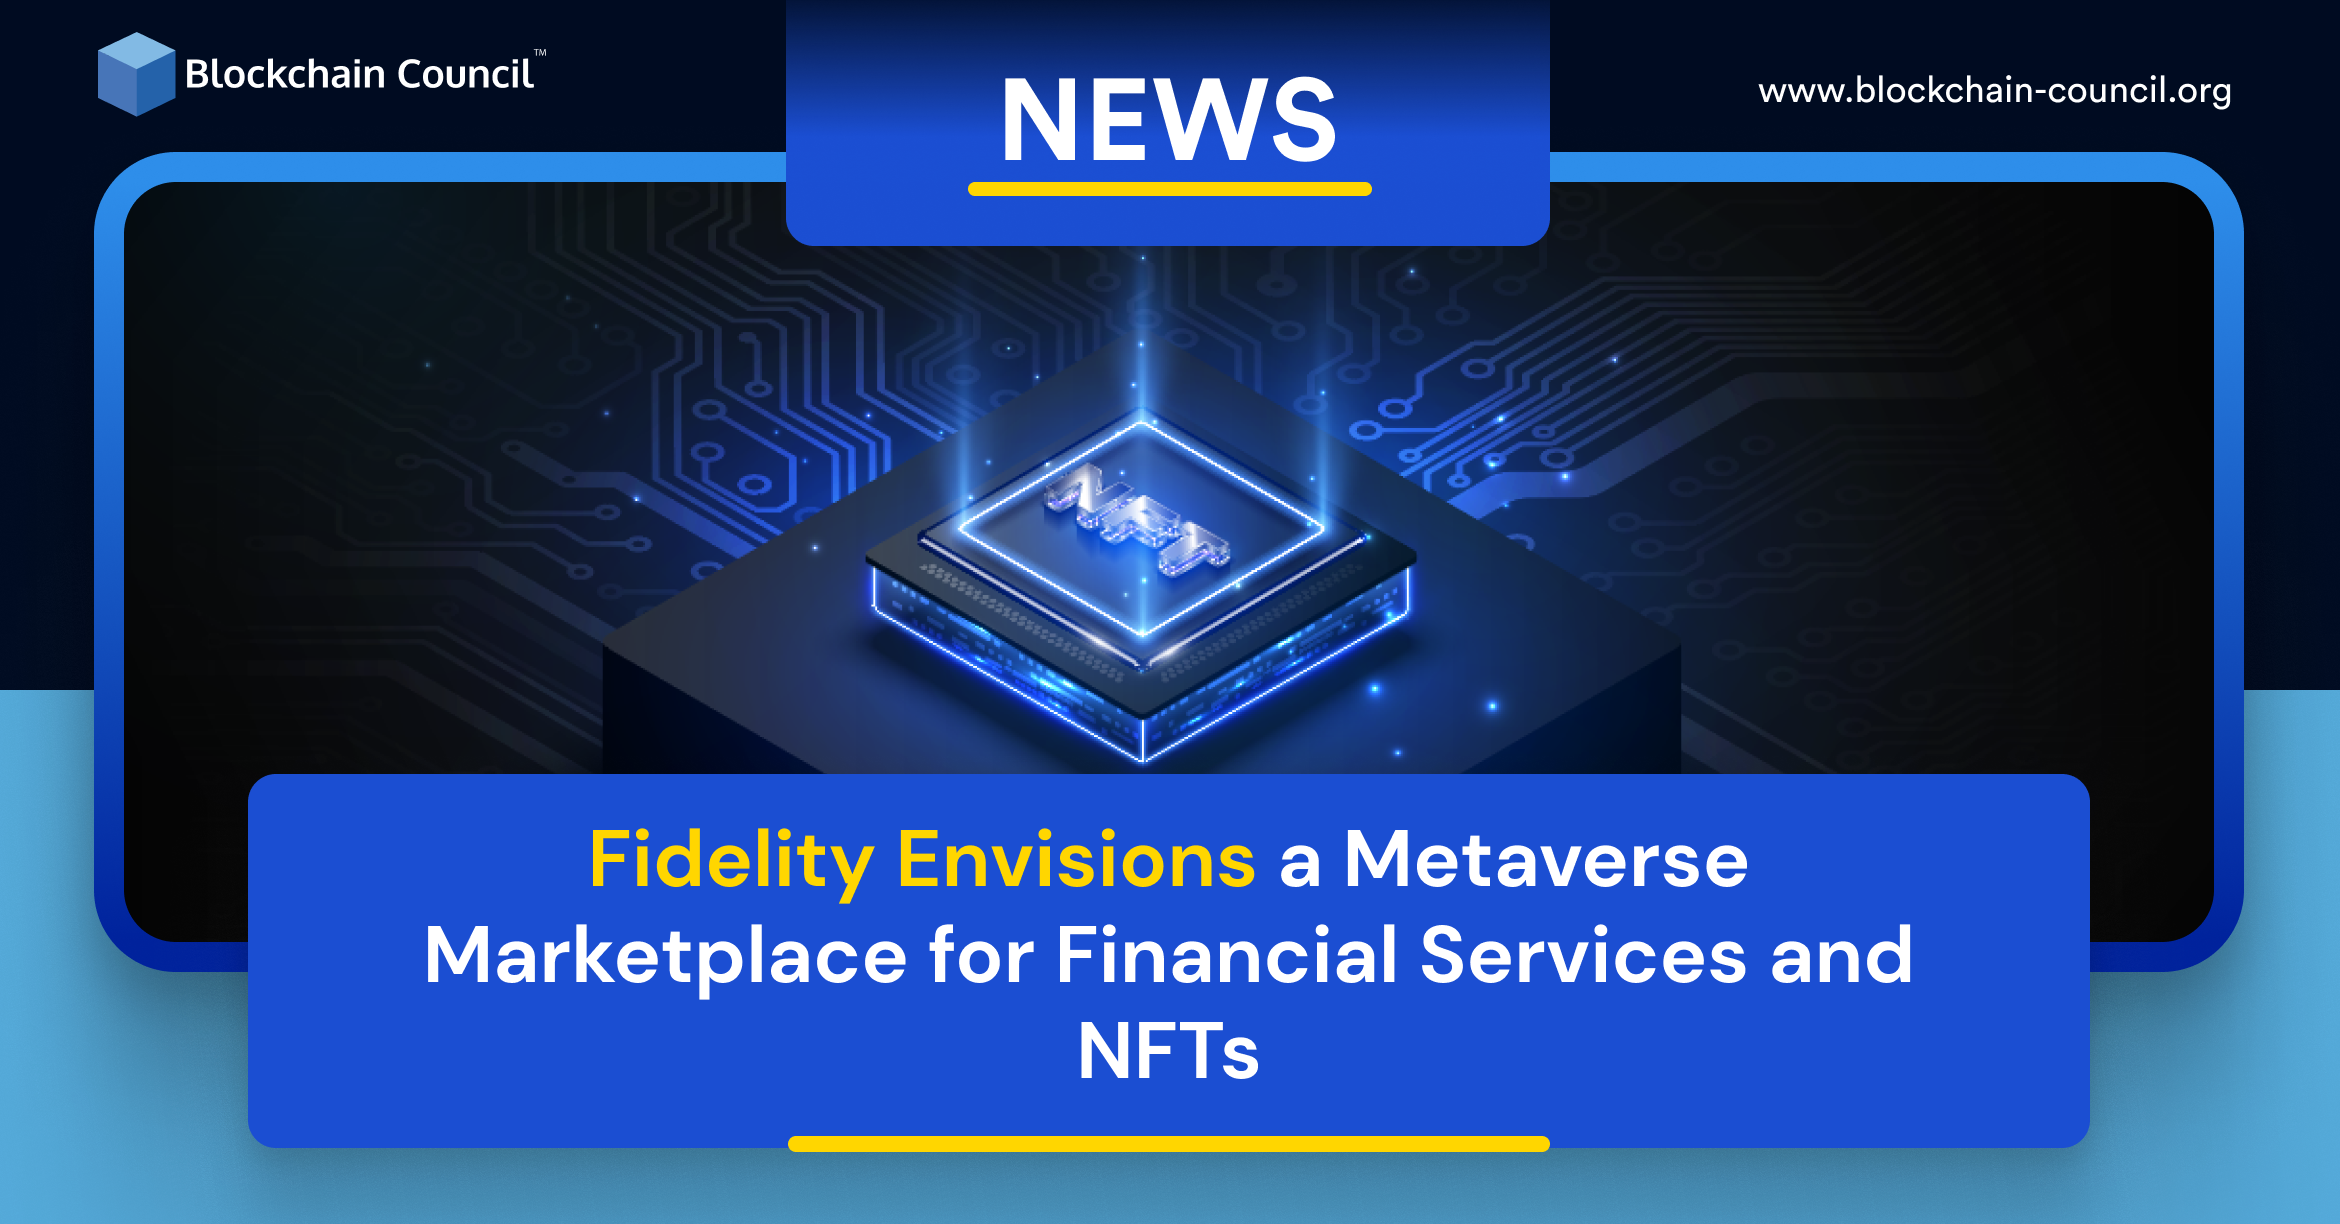 Fidelity Envisions a Metaverse Marketplace for Financial Services and NFTs